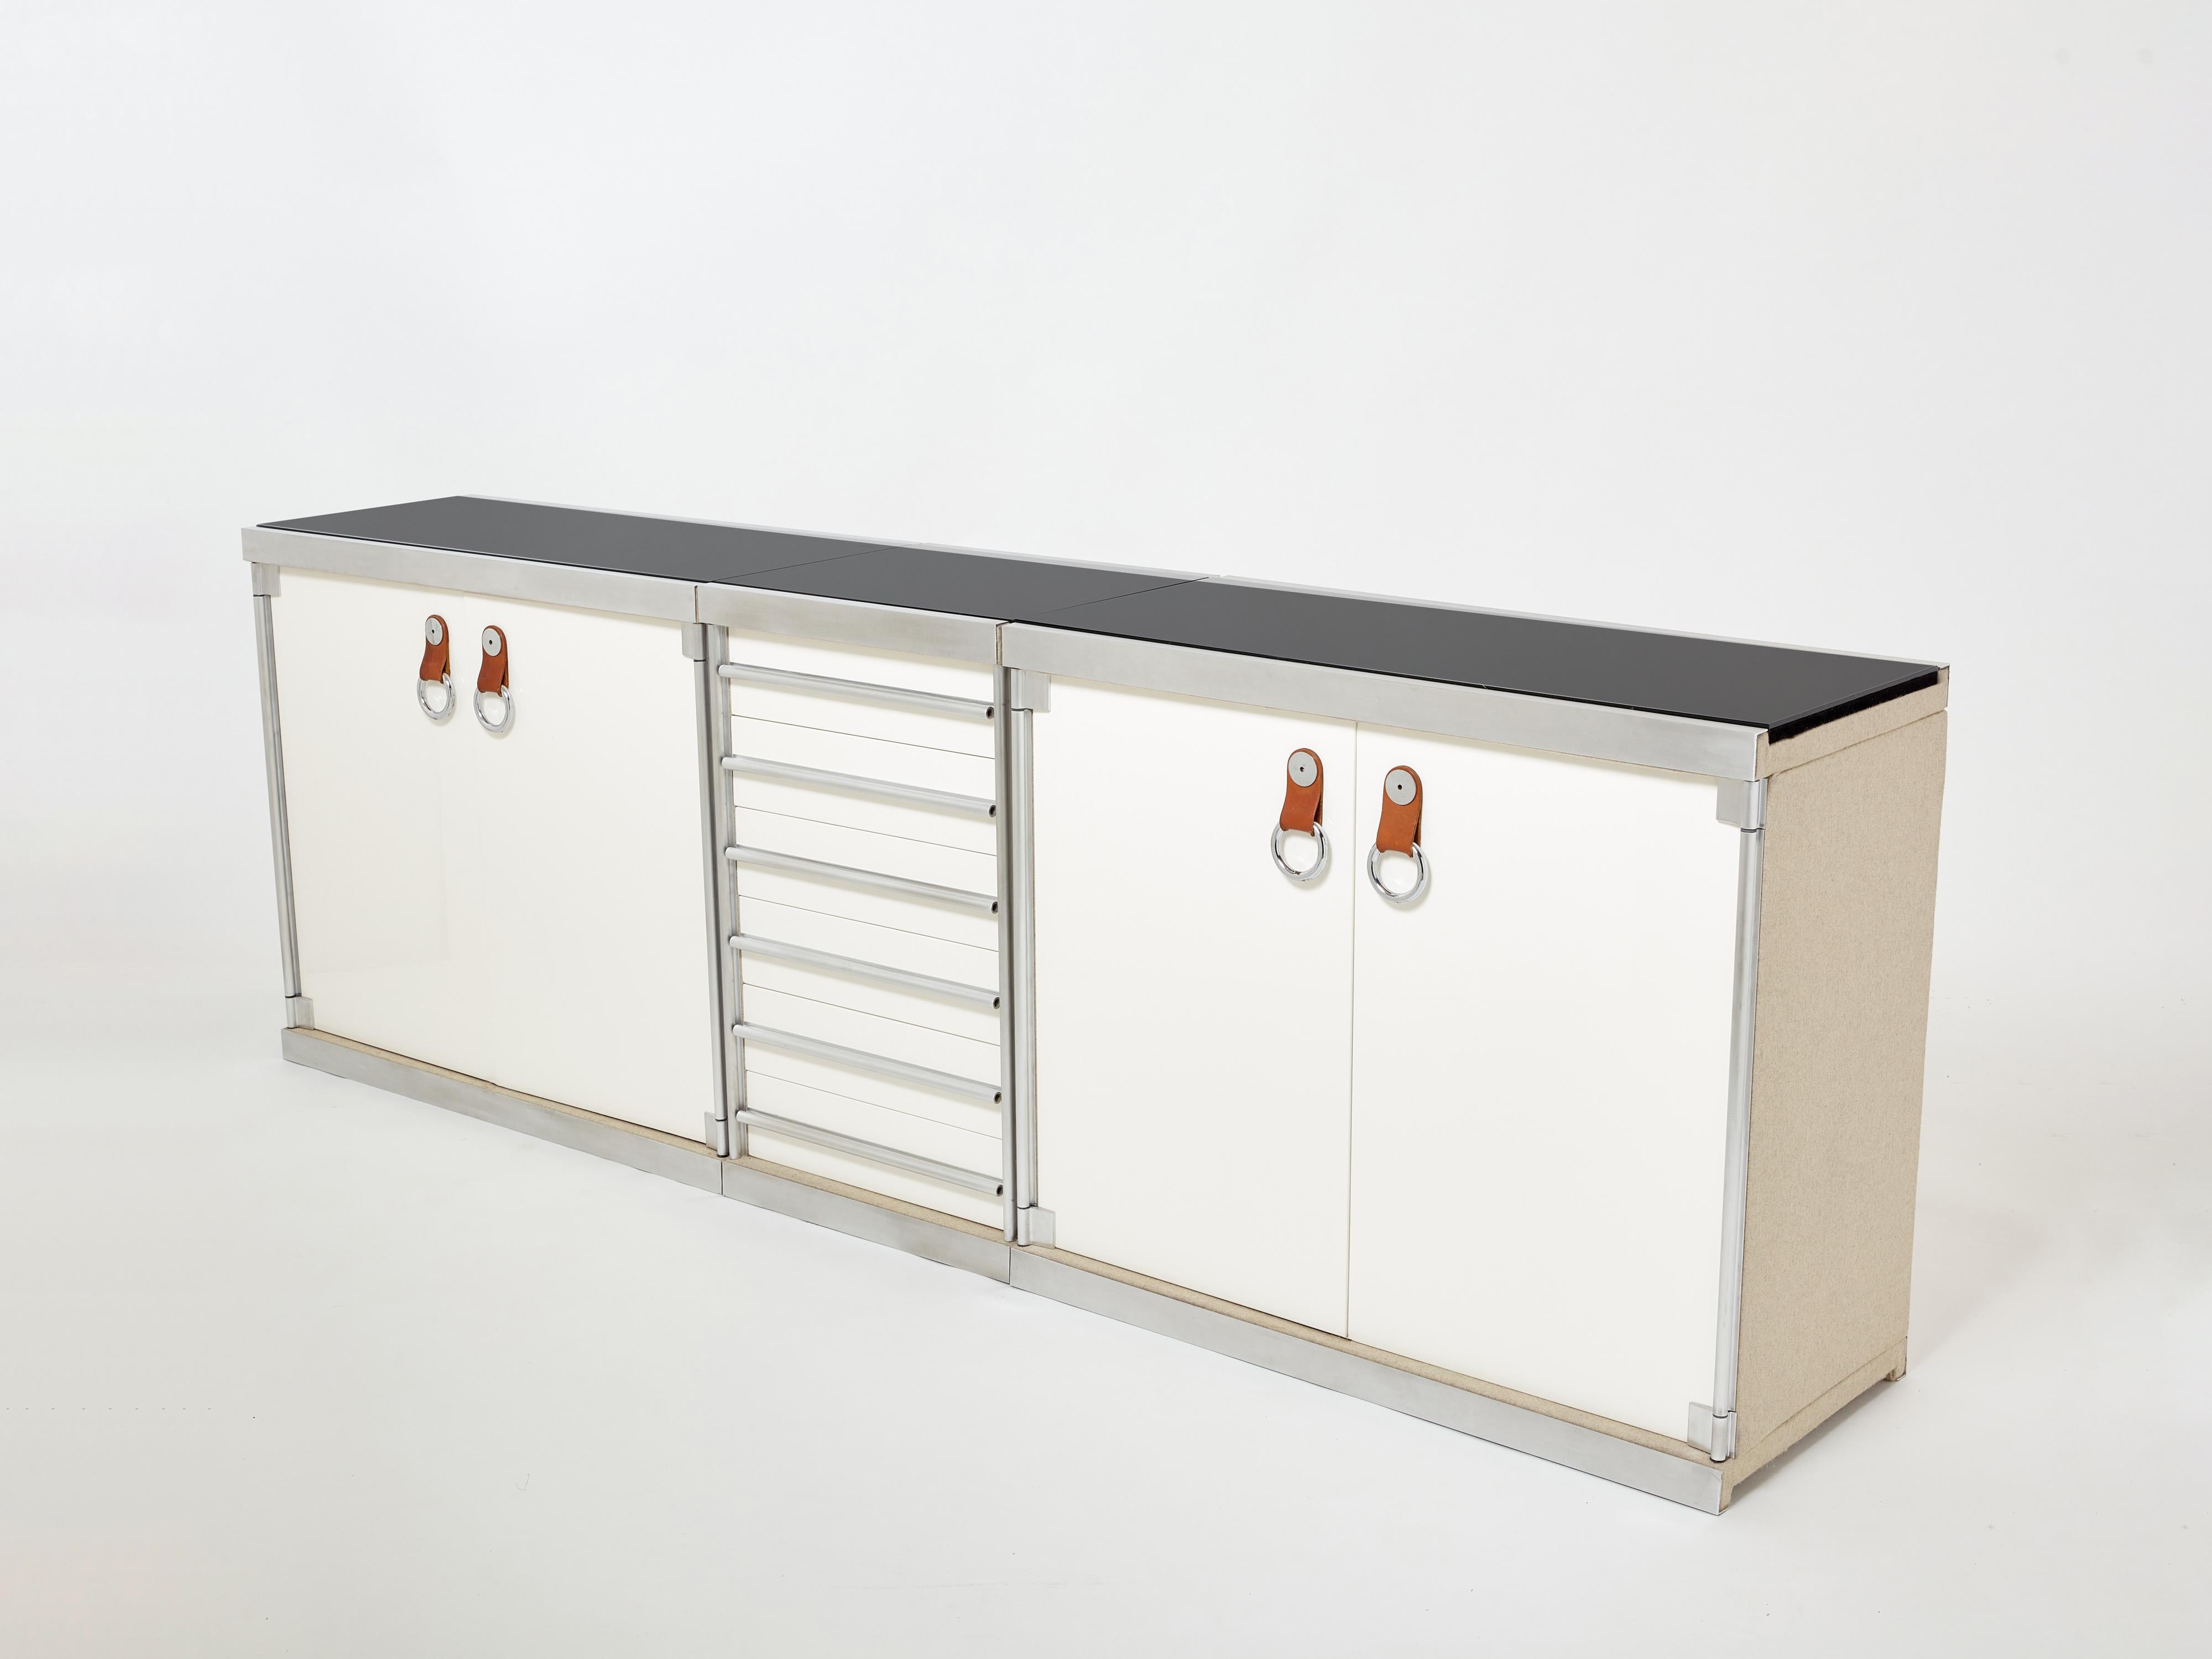 Beautiful set of three cabinets forming a large sideboard designed by Guido Faleschini and produced by I4 Mariani in Italy for Hermès boutiques in the 1970s. This set presents two cabinets with off white lacquered doors with Hermès tan leather